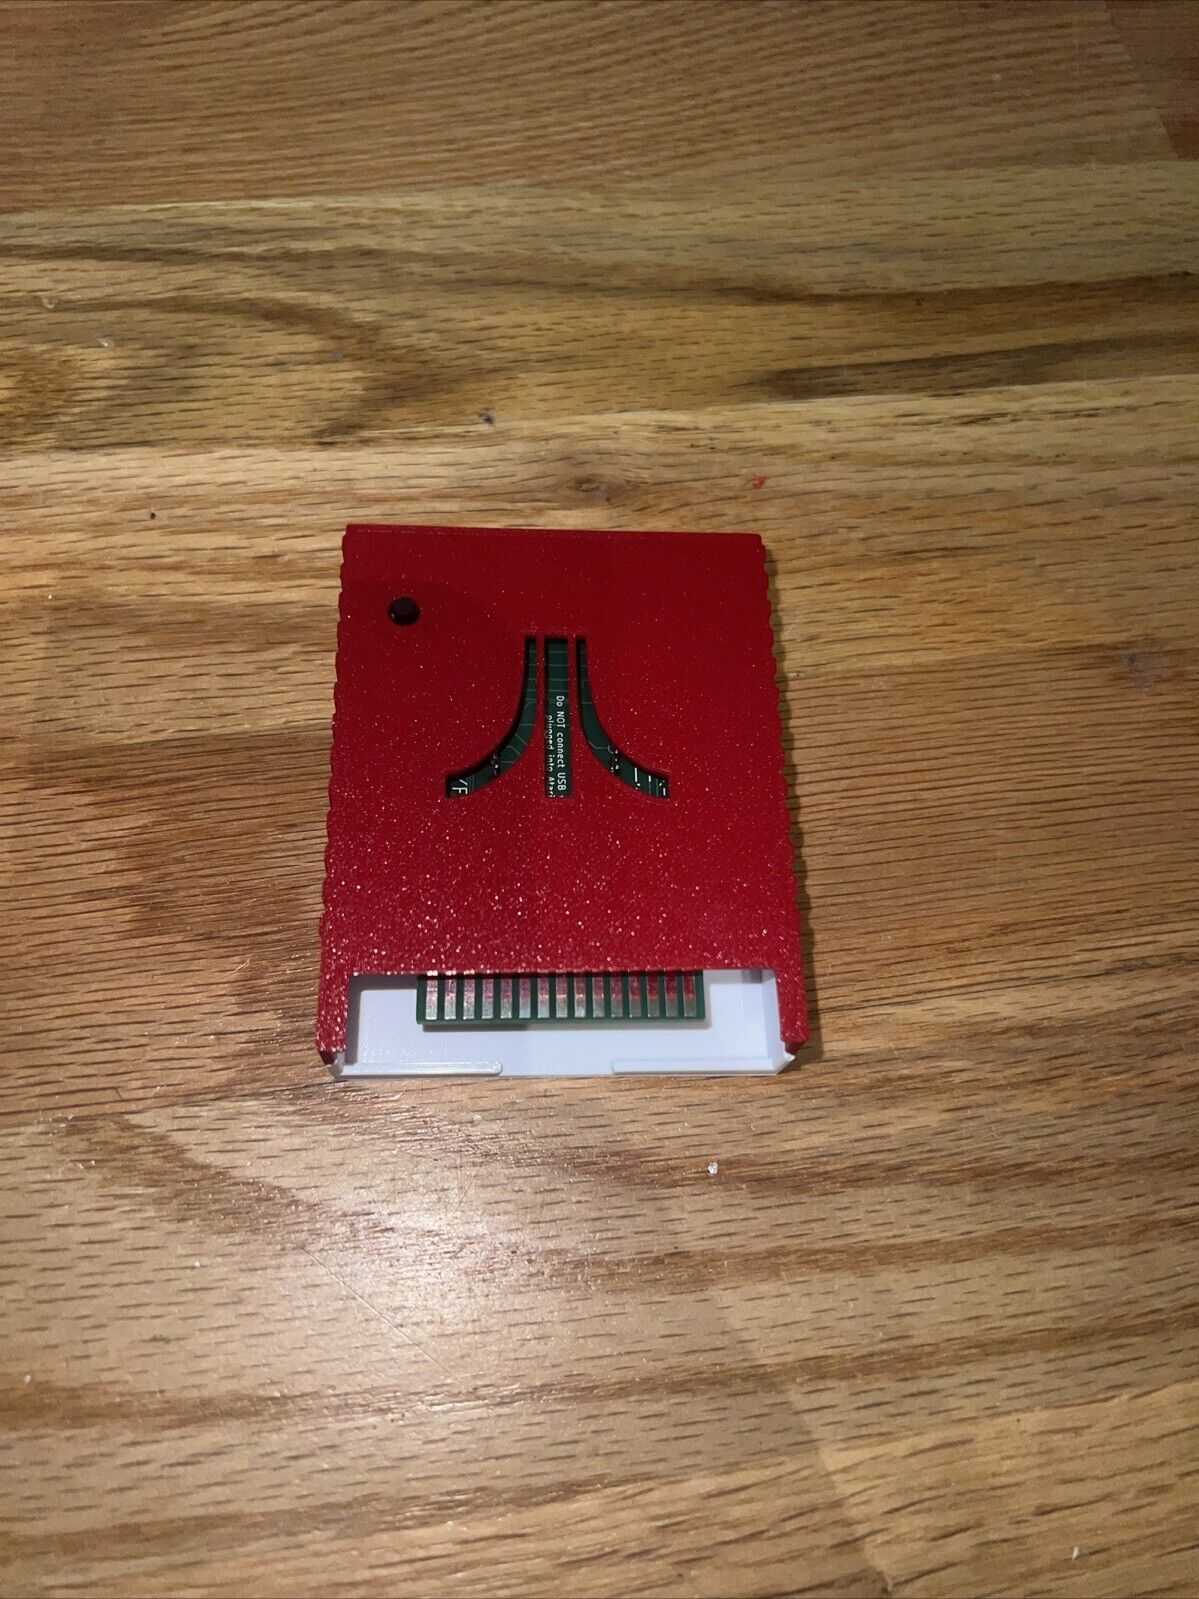 Atari 800xl 65xe 130xe XEGS  Pico.  A8PicoCart.  Loaded with ROMs Red/White